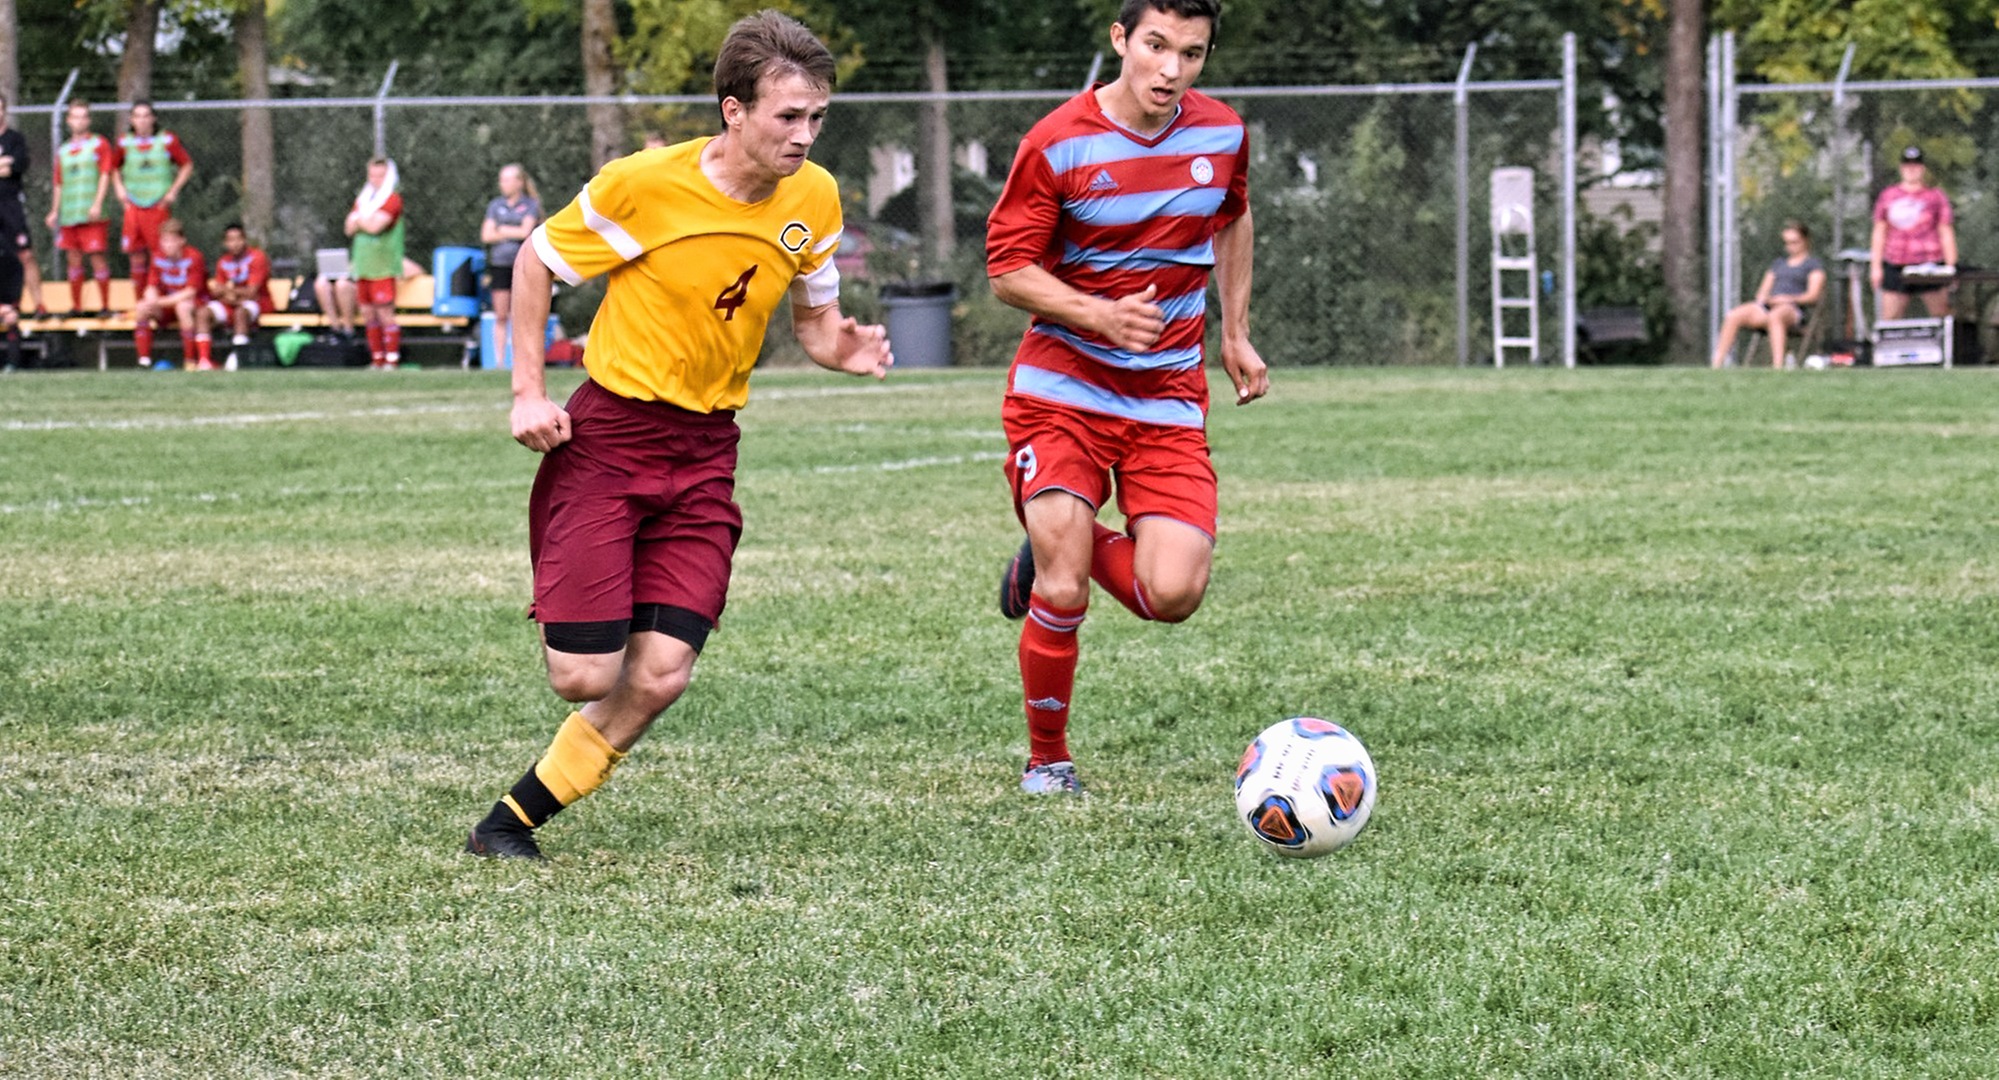 Senior Jacob Schmidt scored the lone Cobber goal in CC's 3-1 loss at unbeaten Simpson. (Photo courtesy of Maddy Reed)